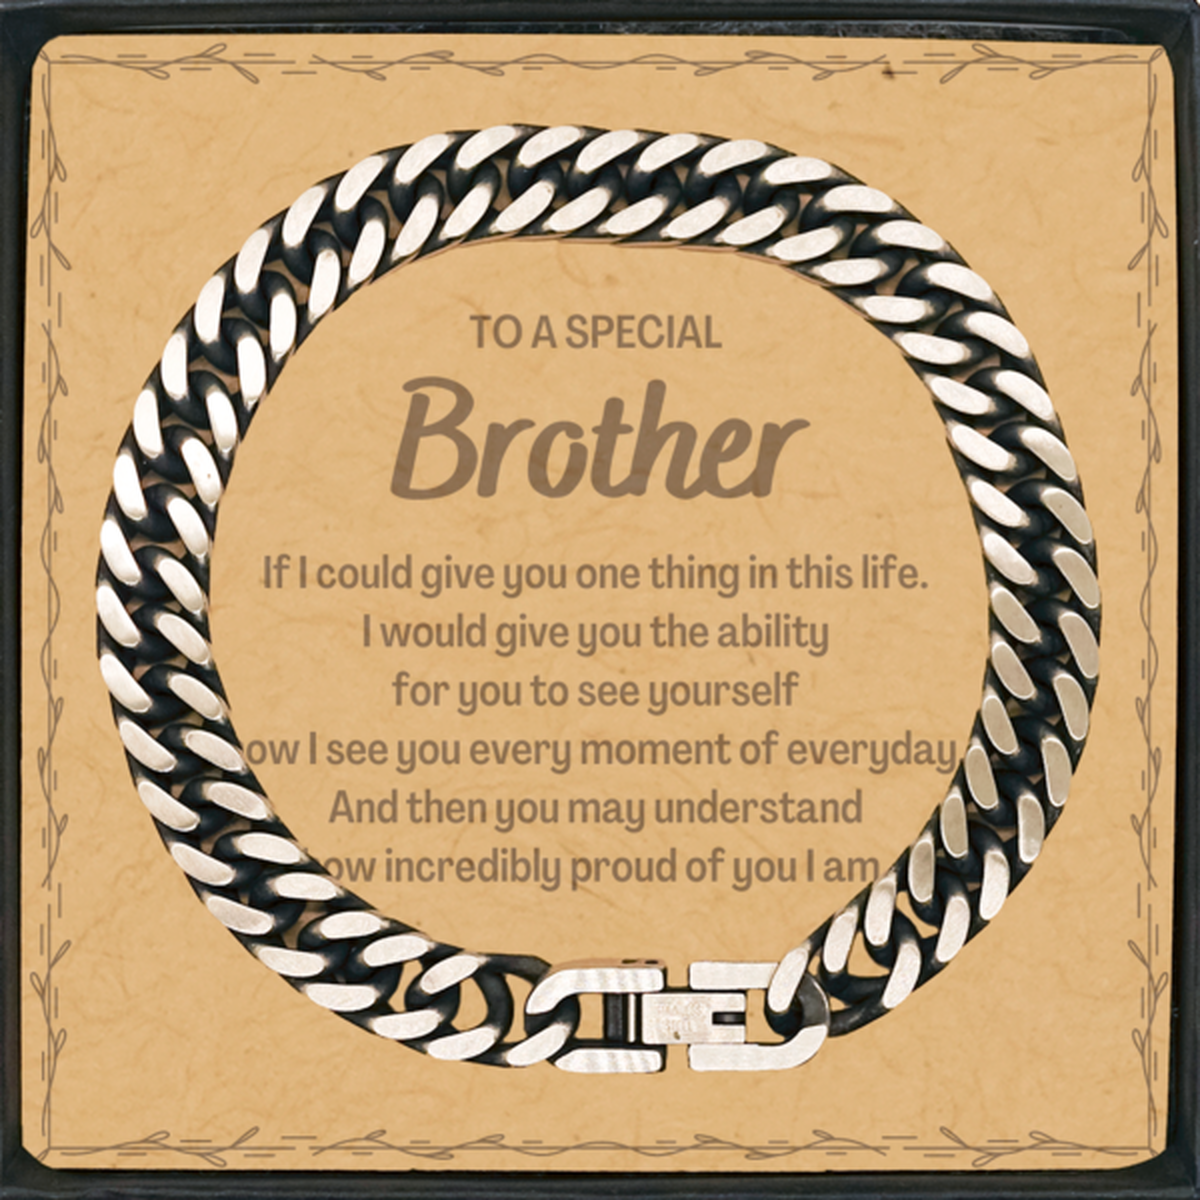 To My Brother Cuban Link Chain Bracelet, Gifts For Brother Message Card, Inspirational Gifts for Christmas Birthday, Epic Gifts for Brother To A Special Brother how incredibly proud of you I am